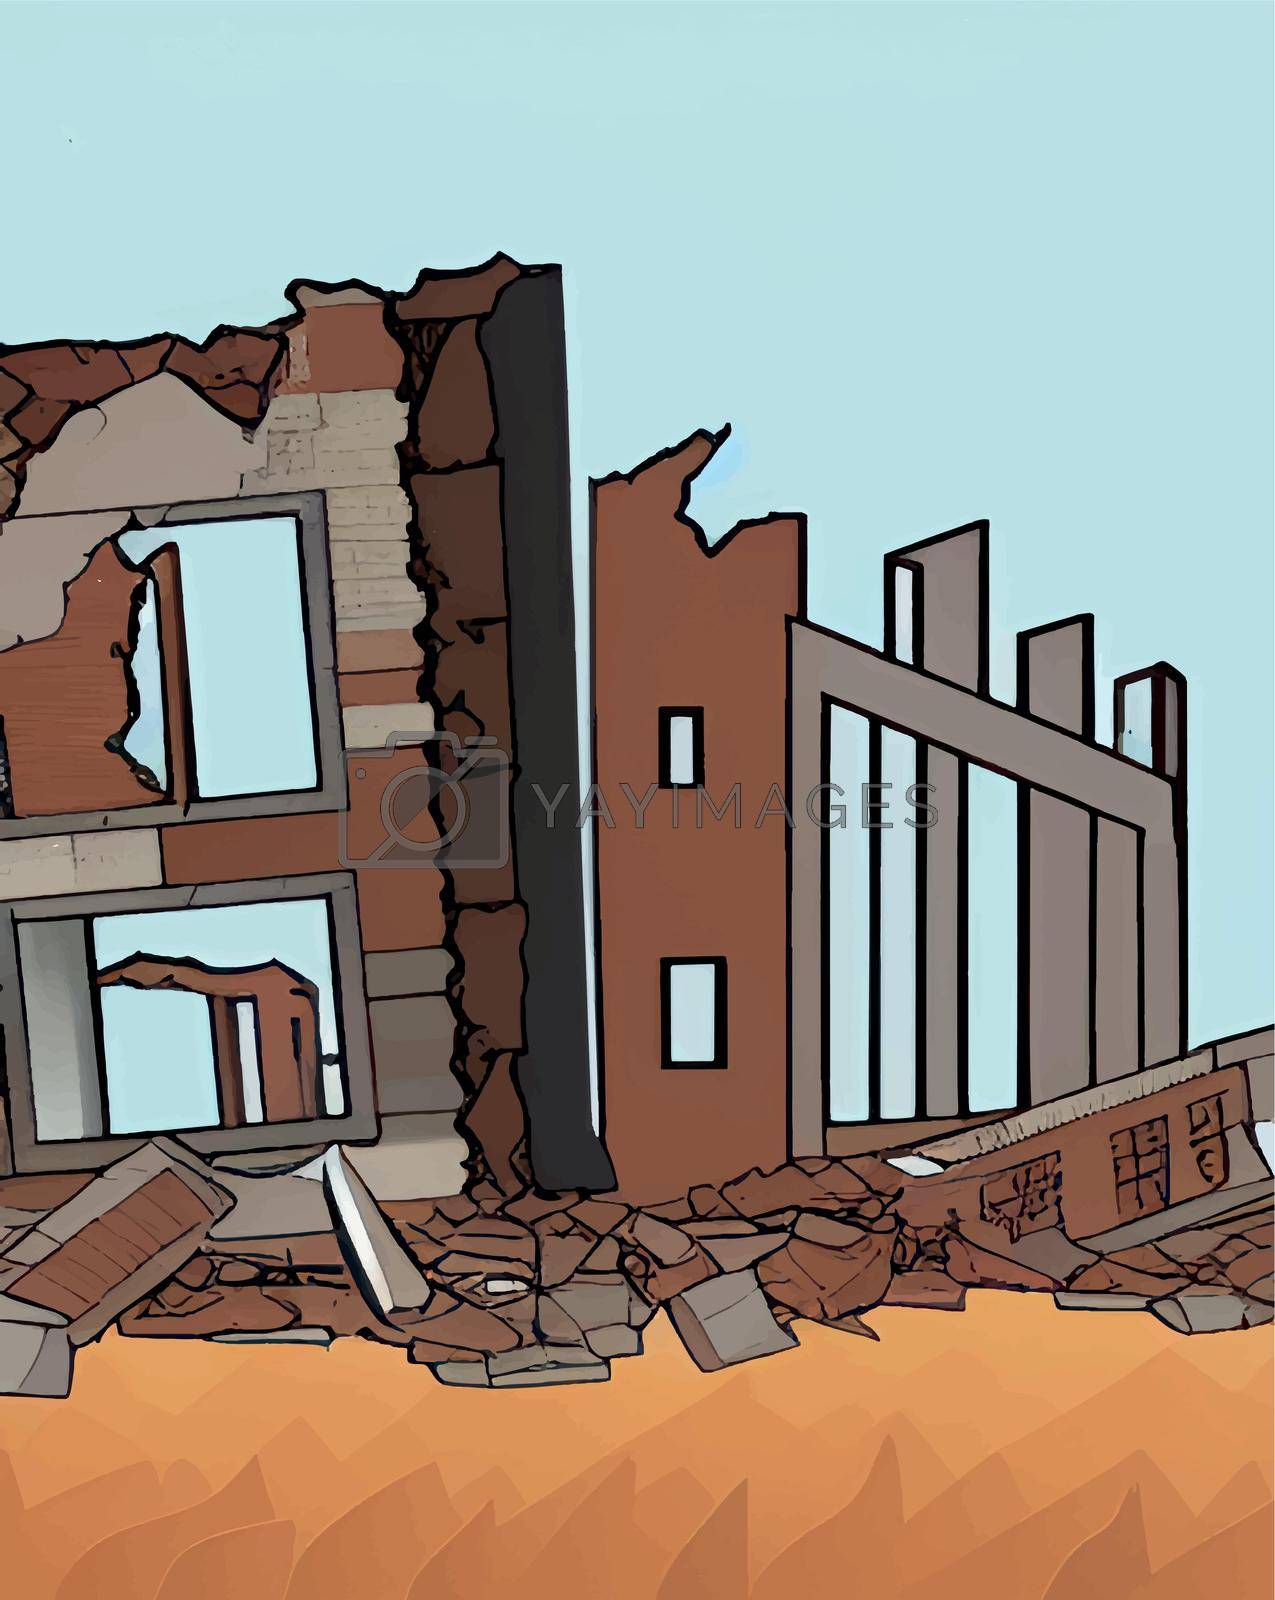 Royalty free image of Earthquake reality and ruined buildings in the world by yilmazsavaskandag